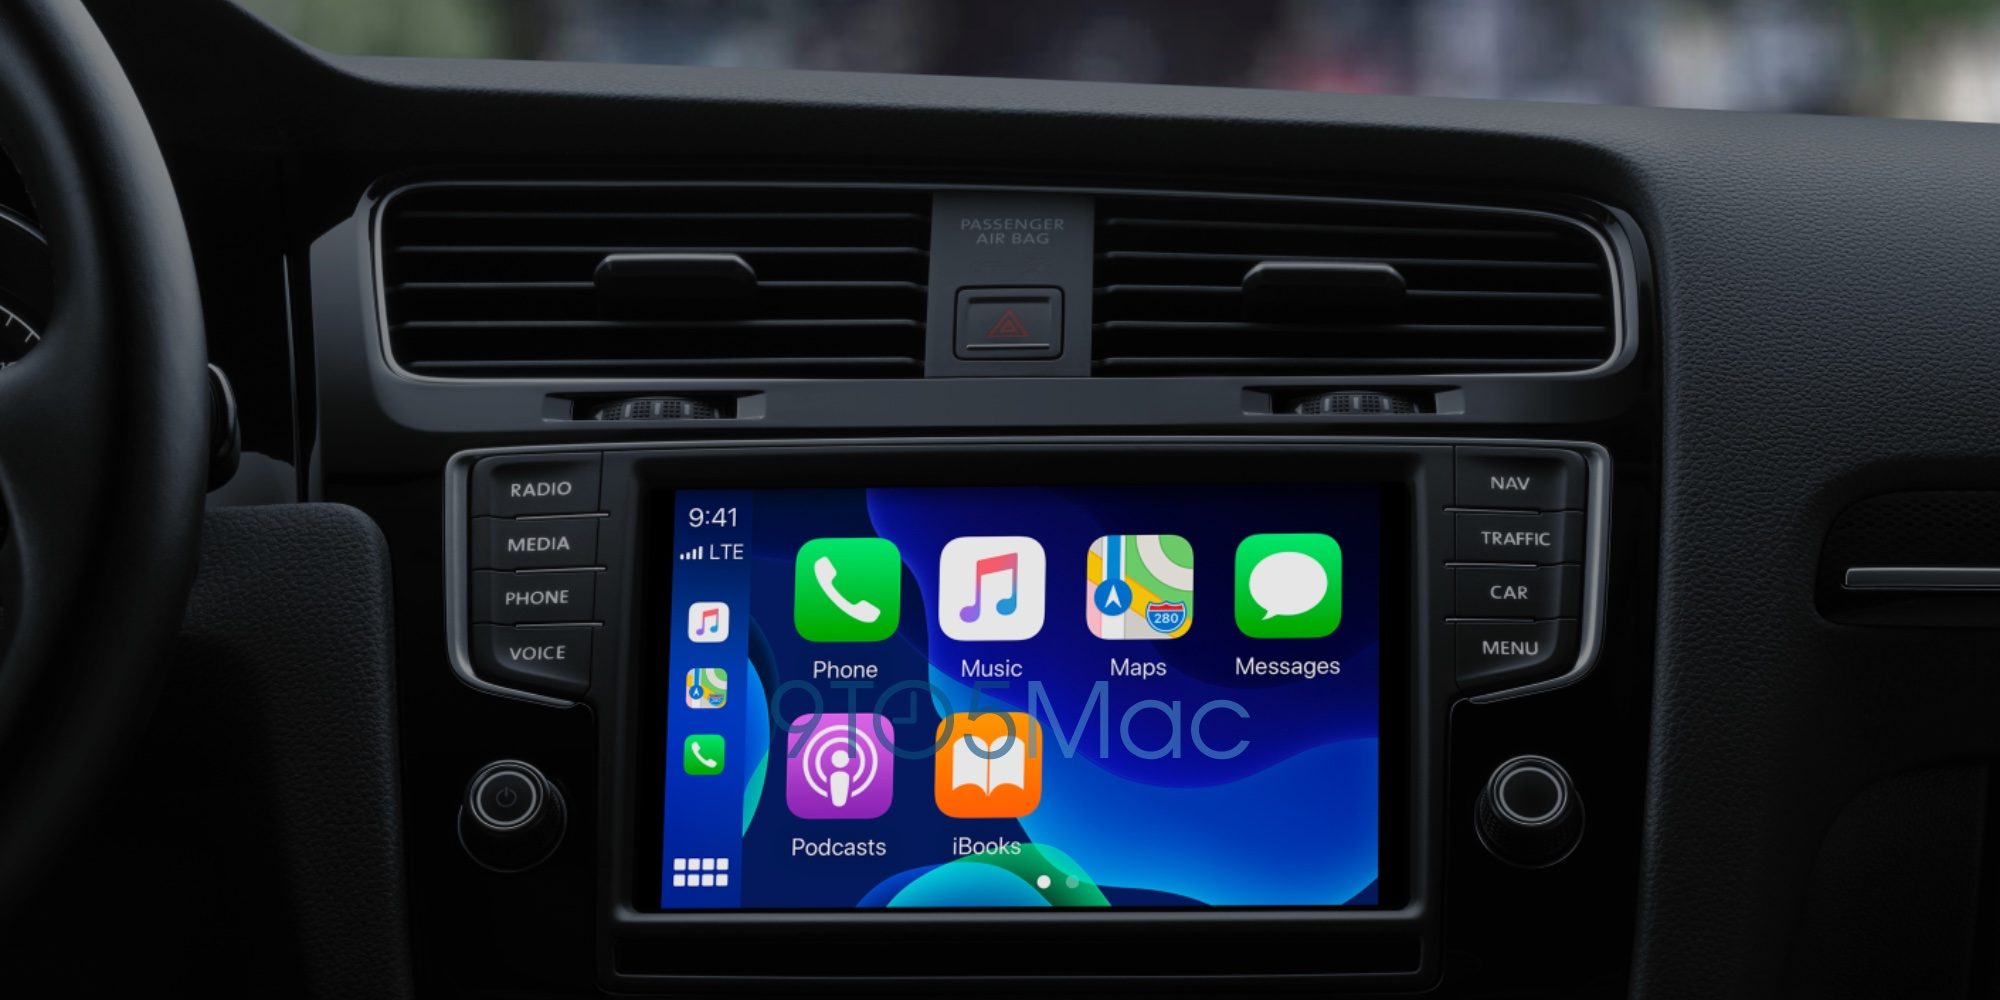 iOS 14: CarPlay wallpapers, deeper Apple Store integration in Maps